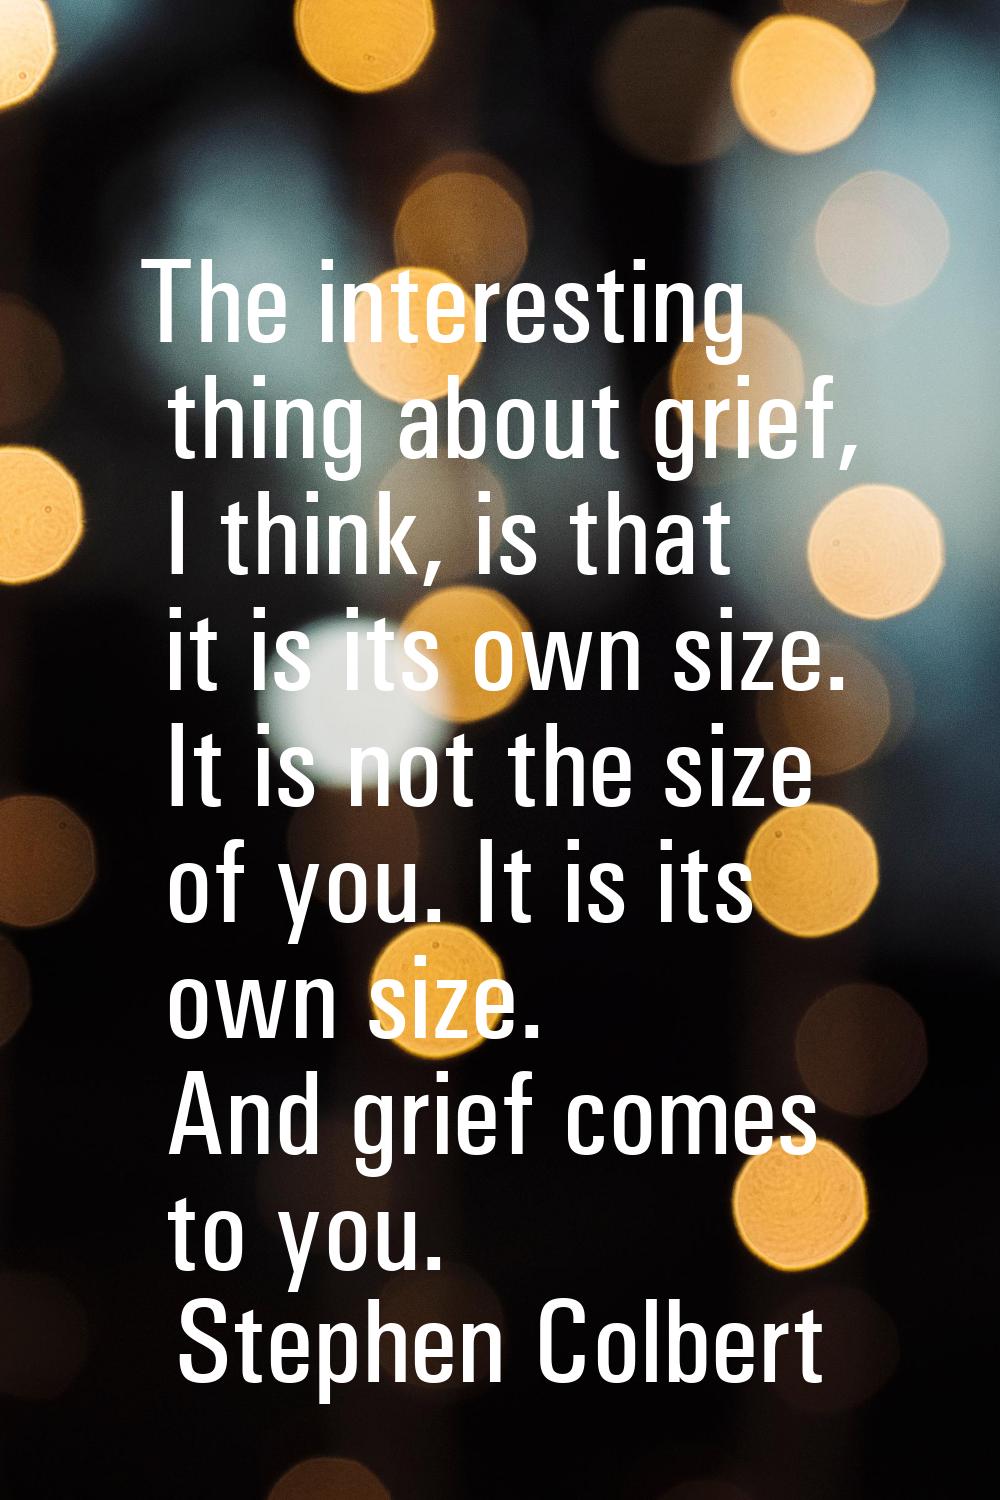 The interesting thing about grief, I think, is that it is its own size. It is not the size of you. 